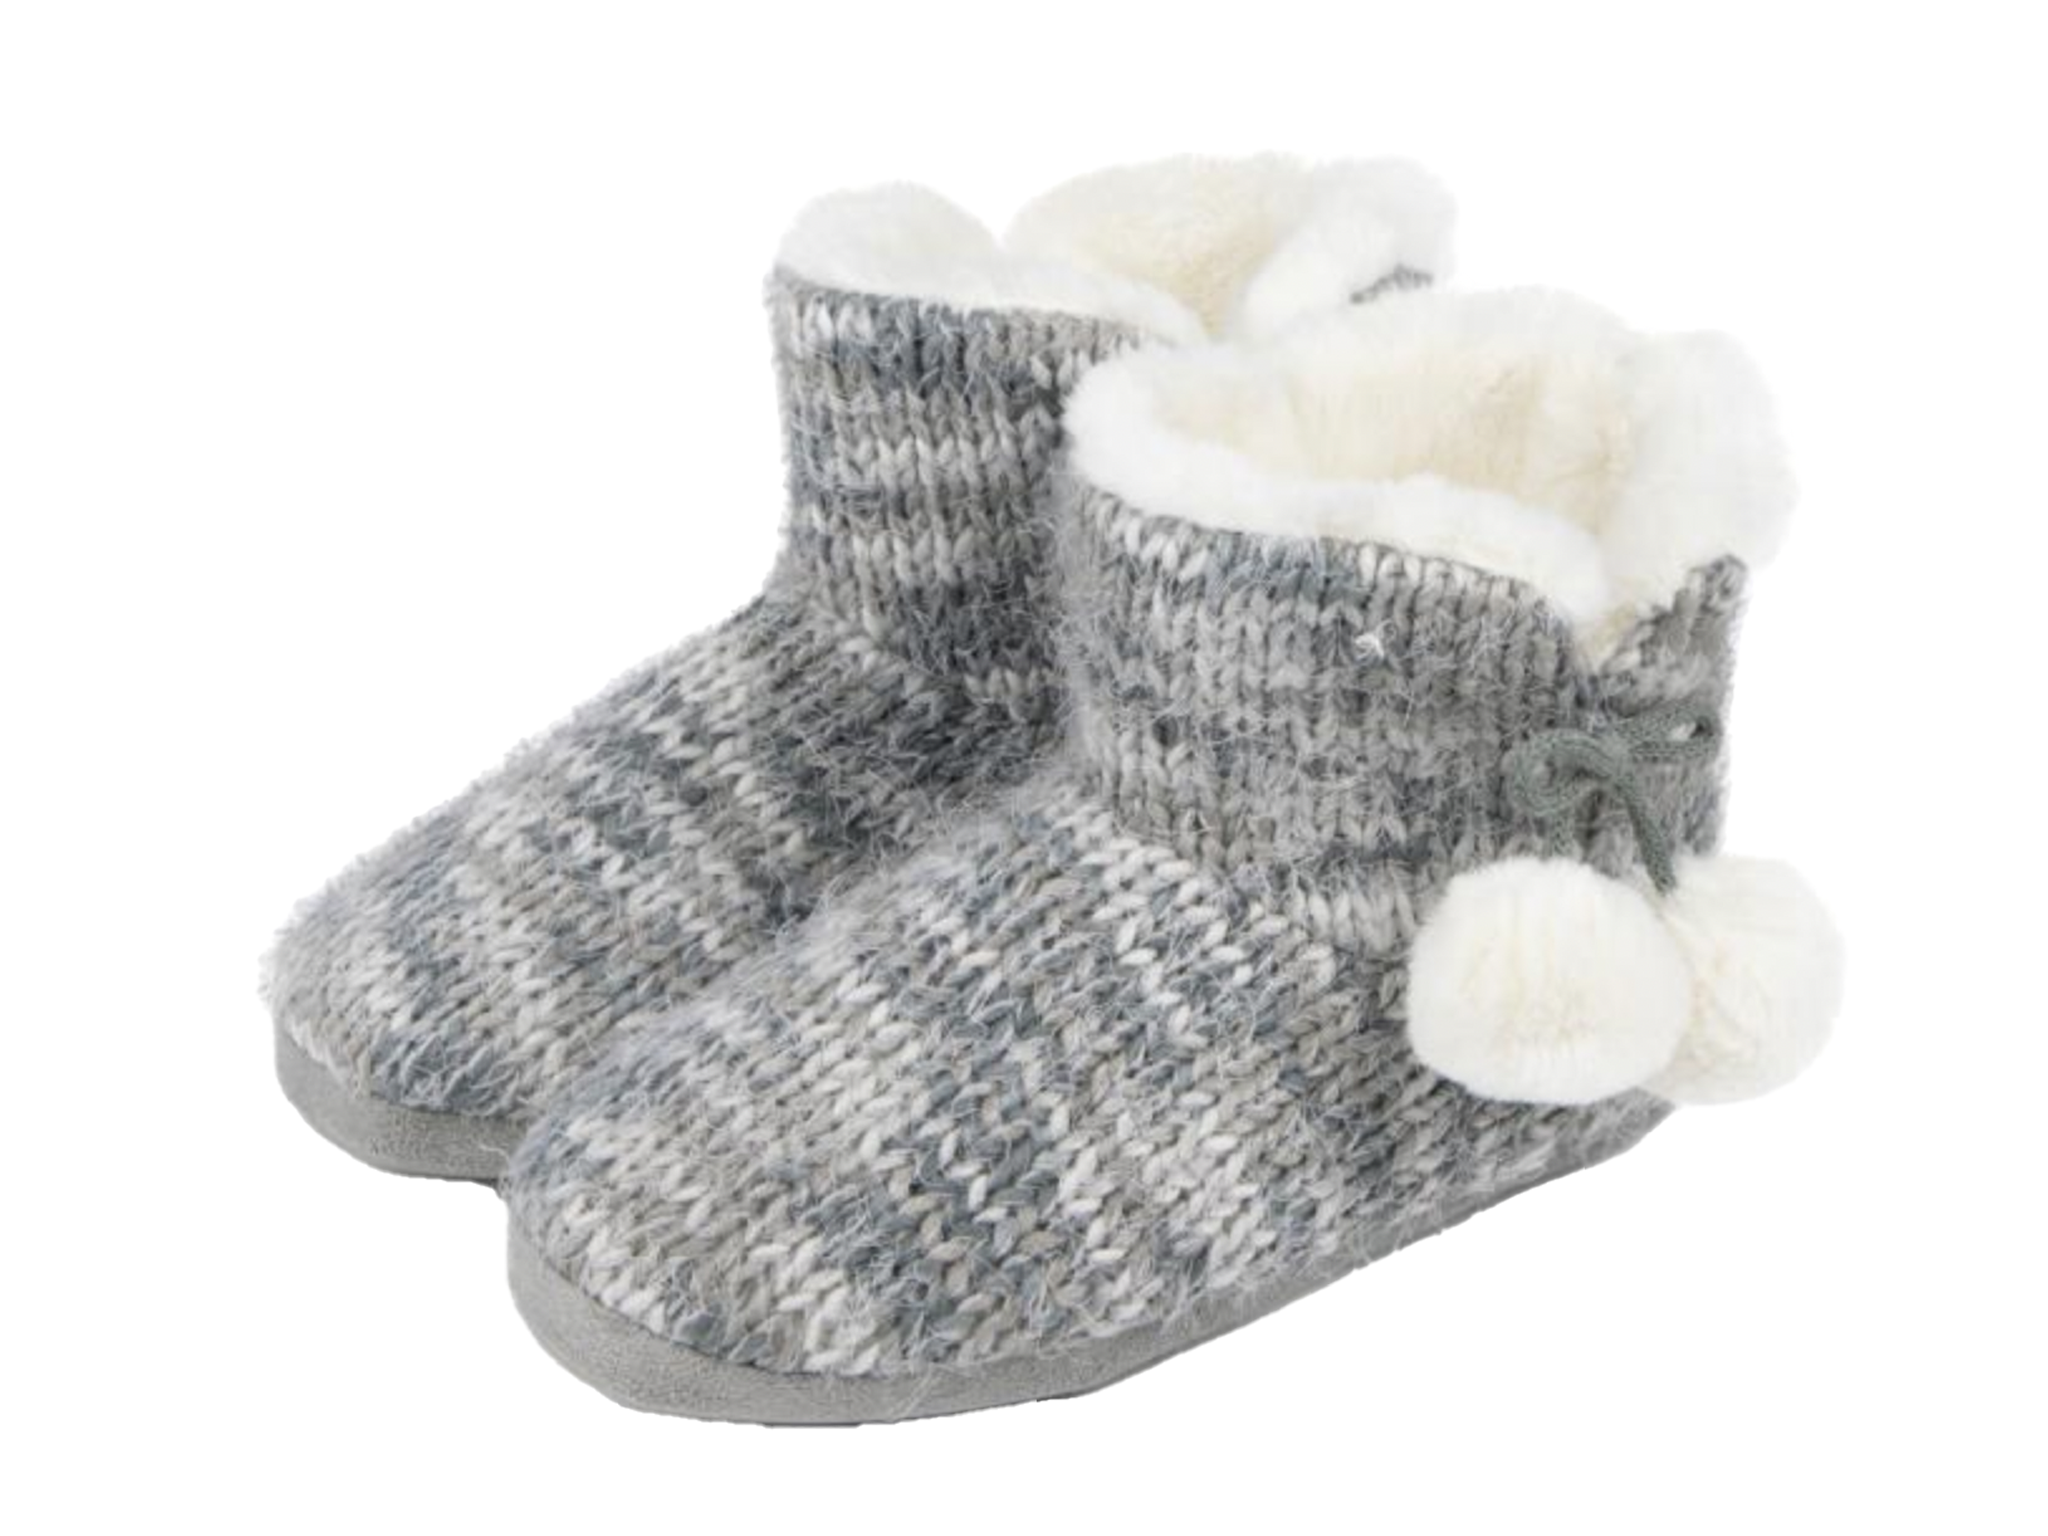 Totes ladies knitted boot slippers with pom pom